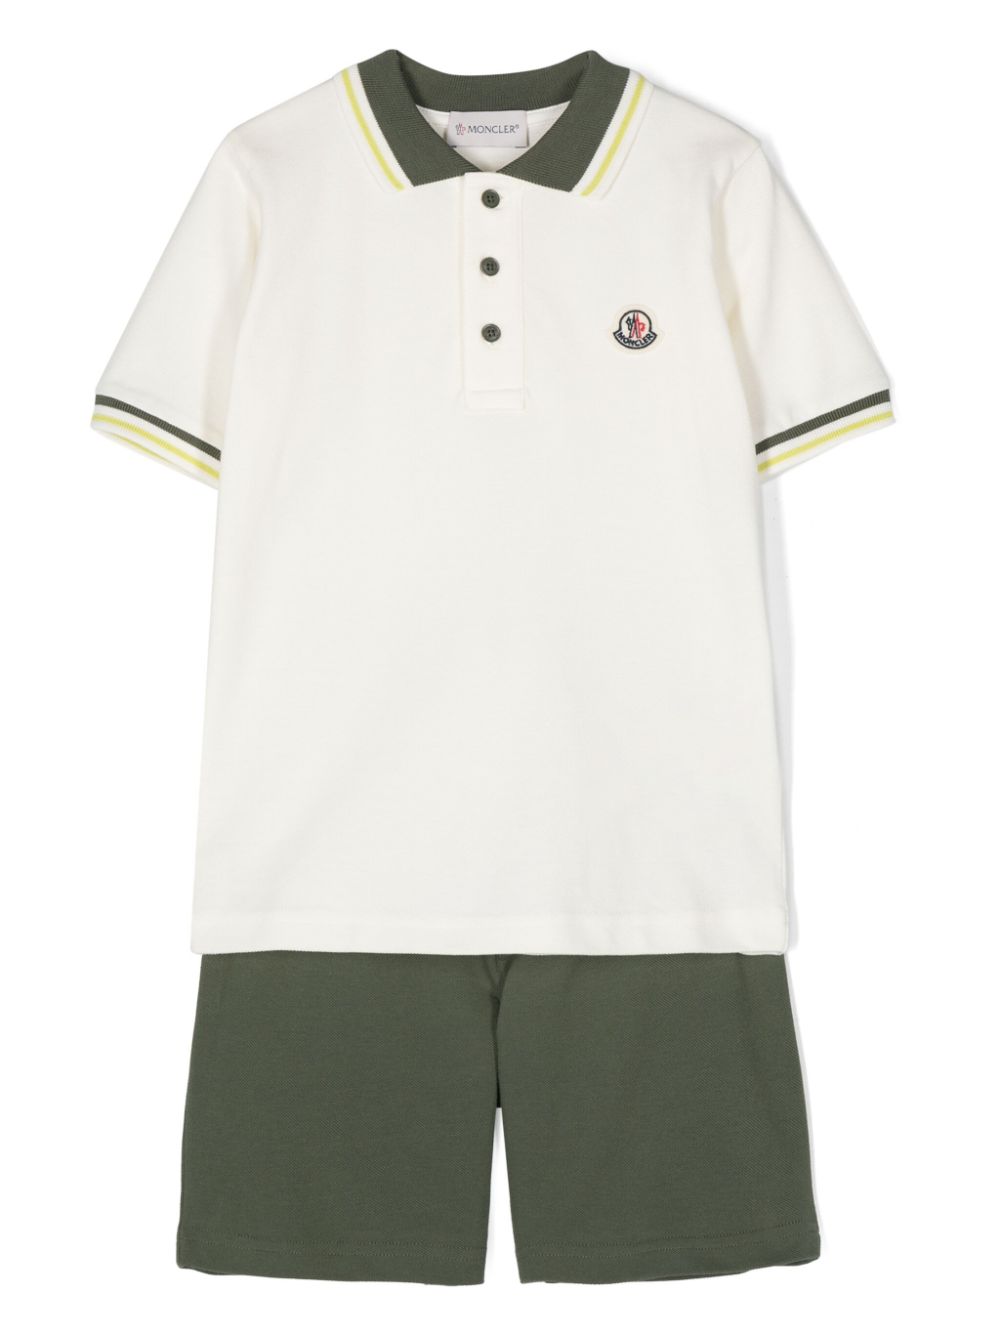 White and green sports suit for boys